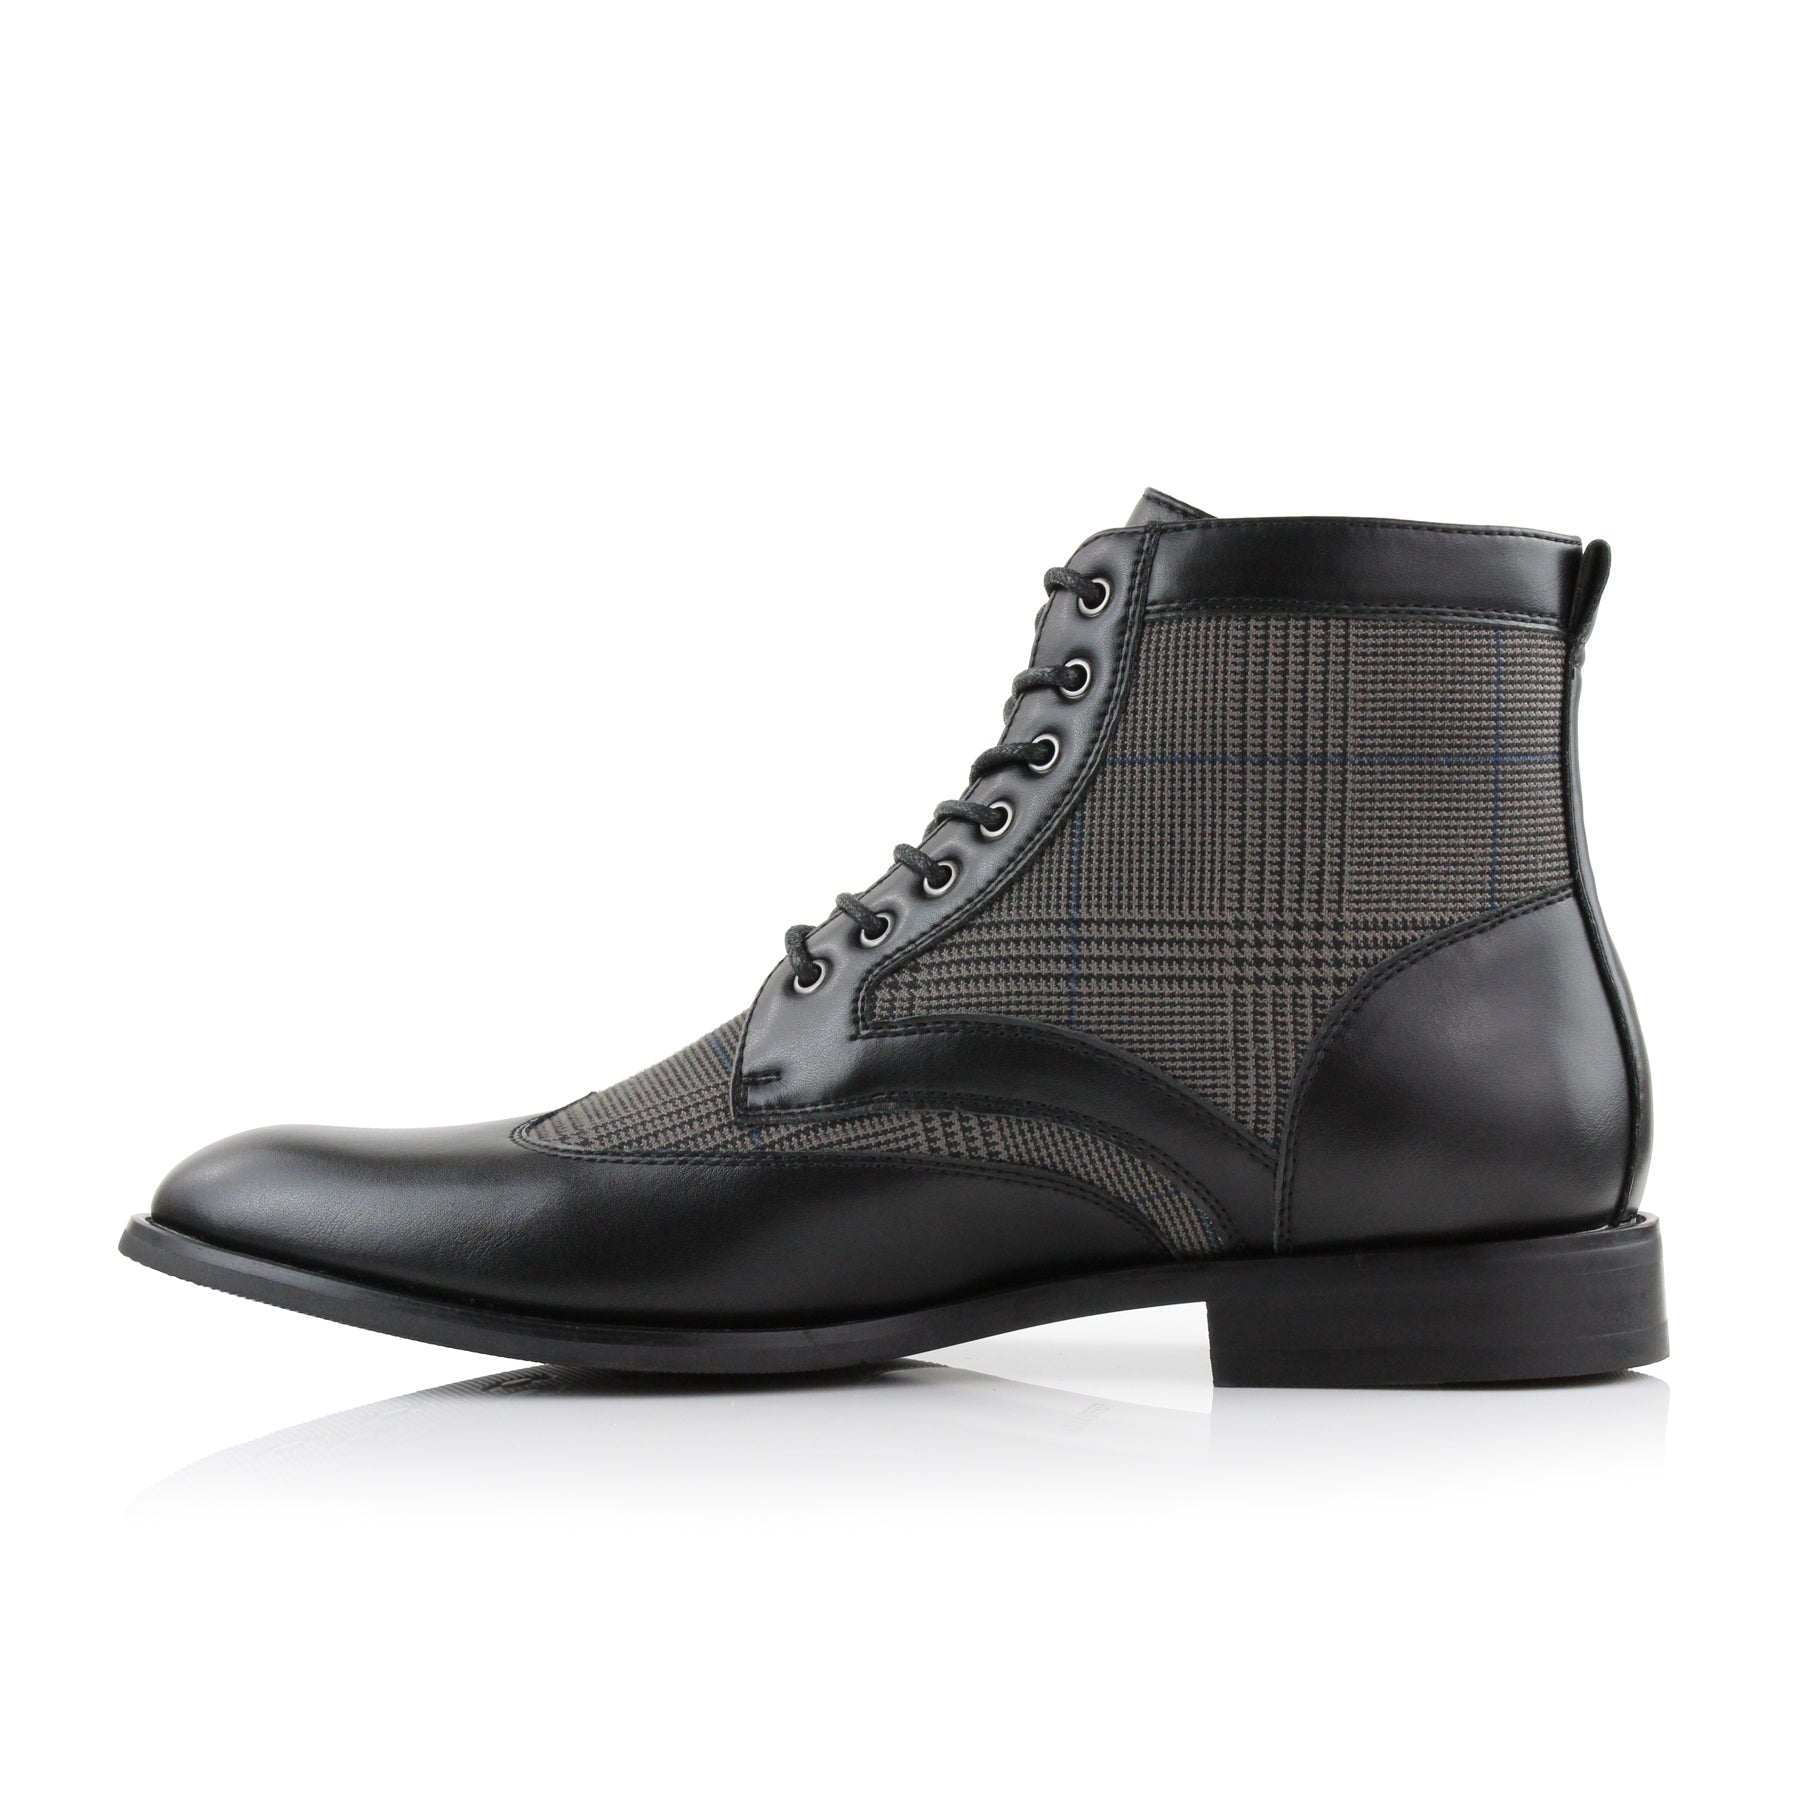 Plaid Wingtip Boots | Gideon by Ferro Aldo | Conal Footwear | Inner Side Angle View